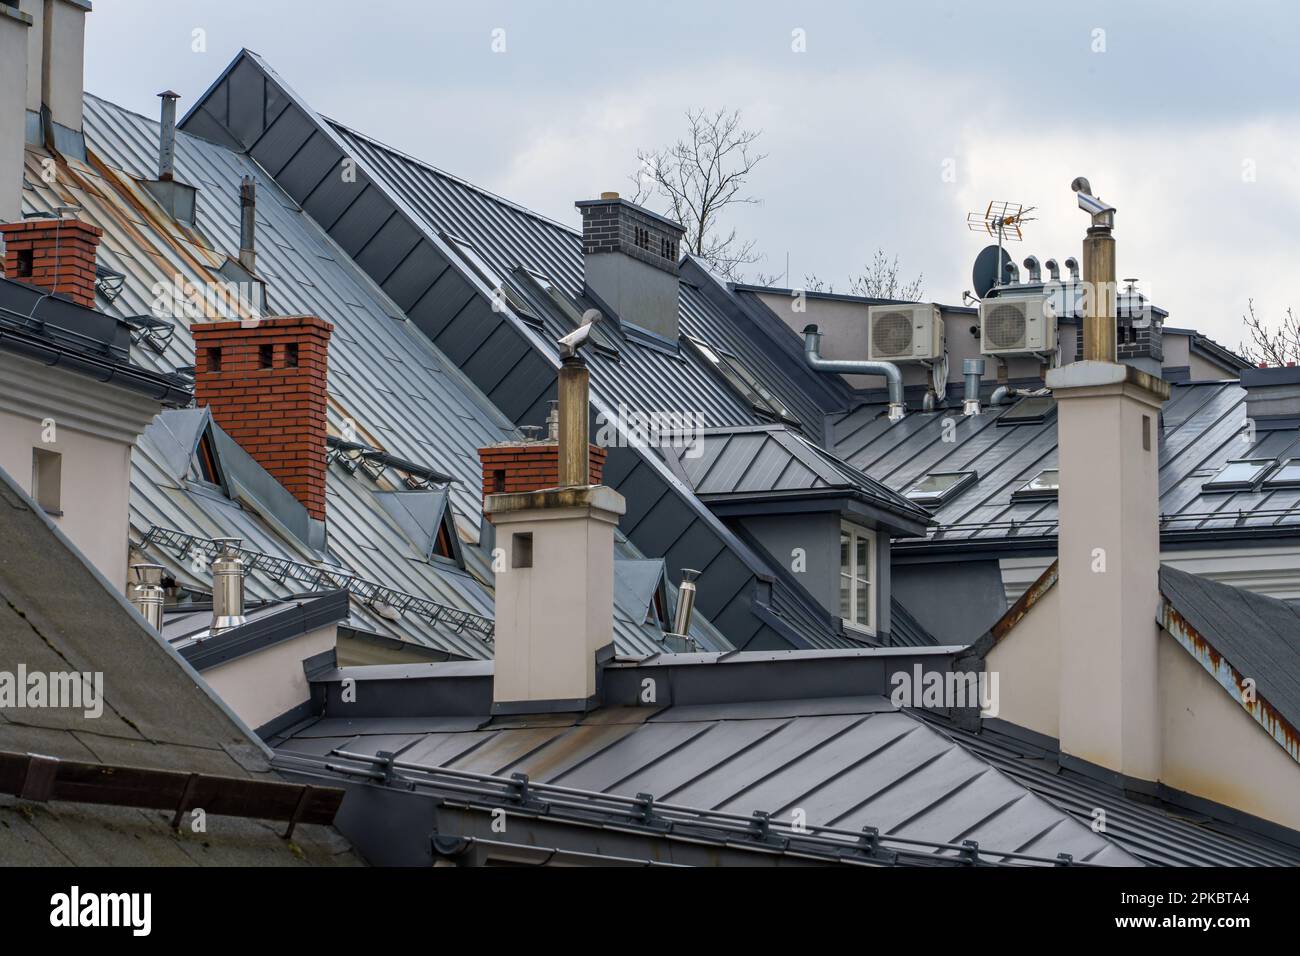 Roofs of tenement houses covered with sheet metal, gray metal roof, chimneys Stock Photo